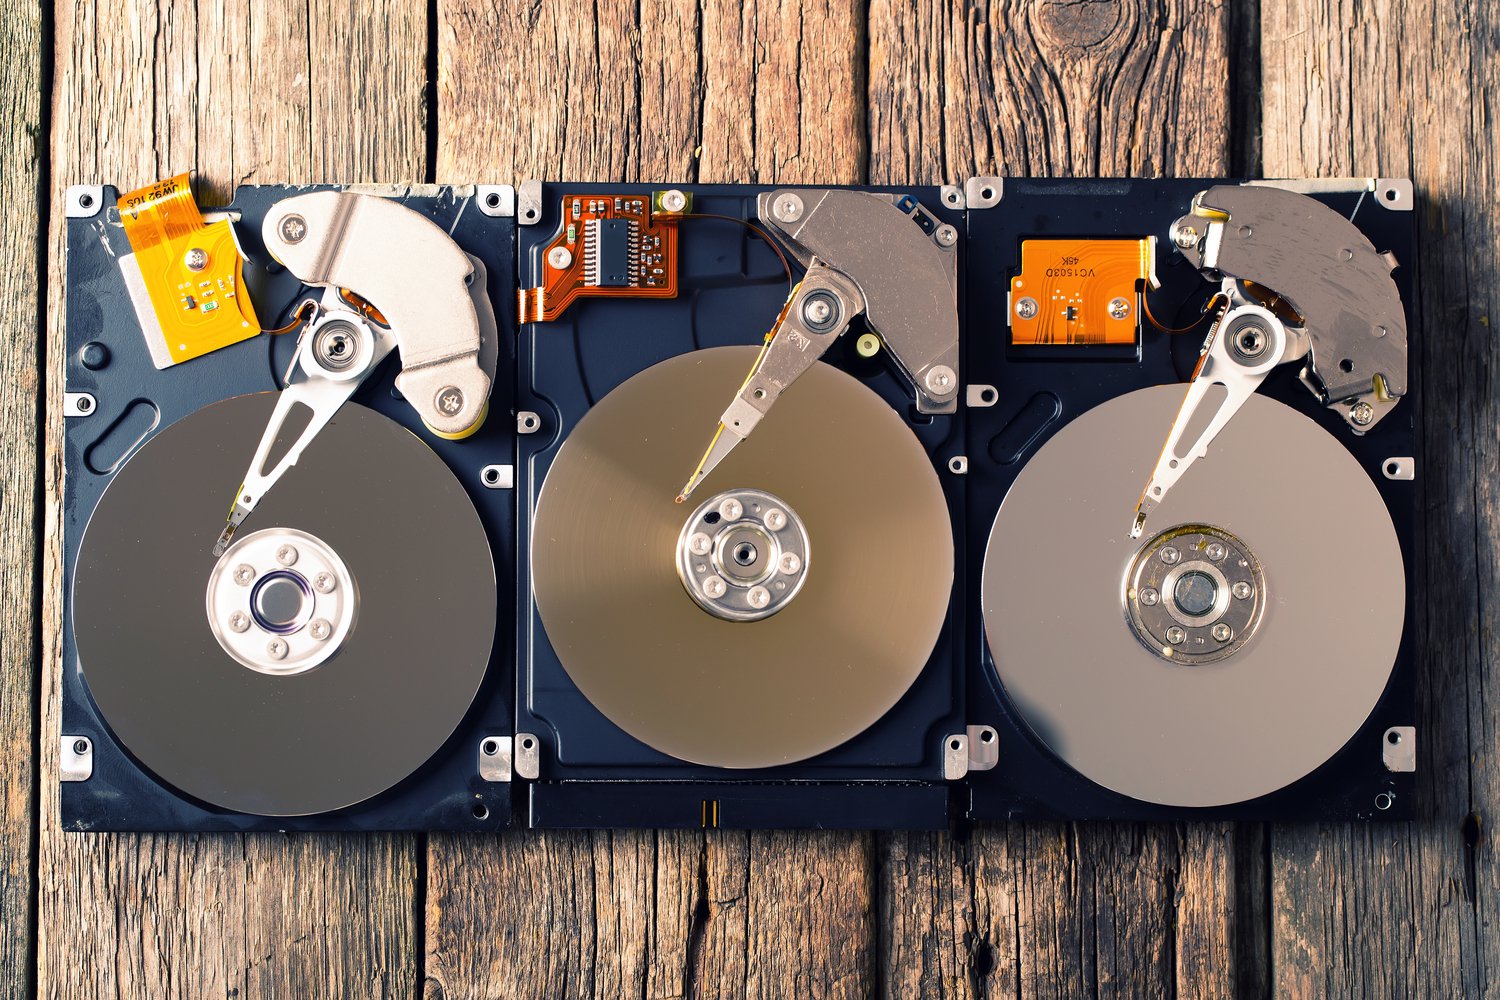 IBM, Seagate Team Up To Tackle Hard Drive Fakes With Blockchain